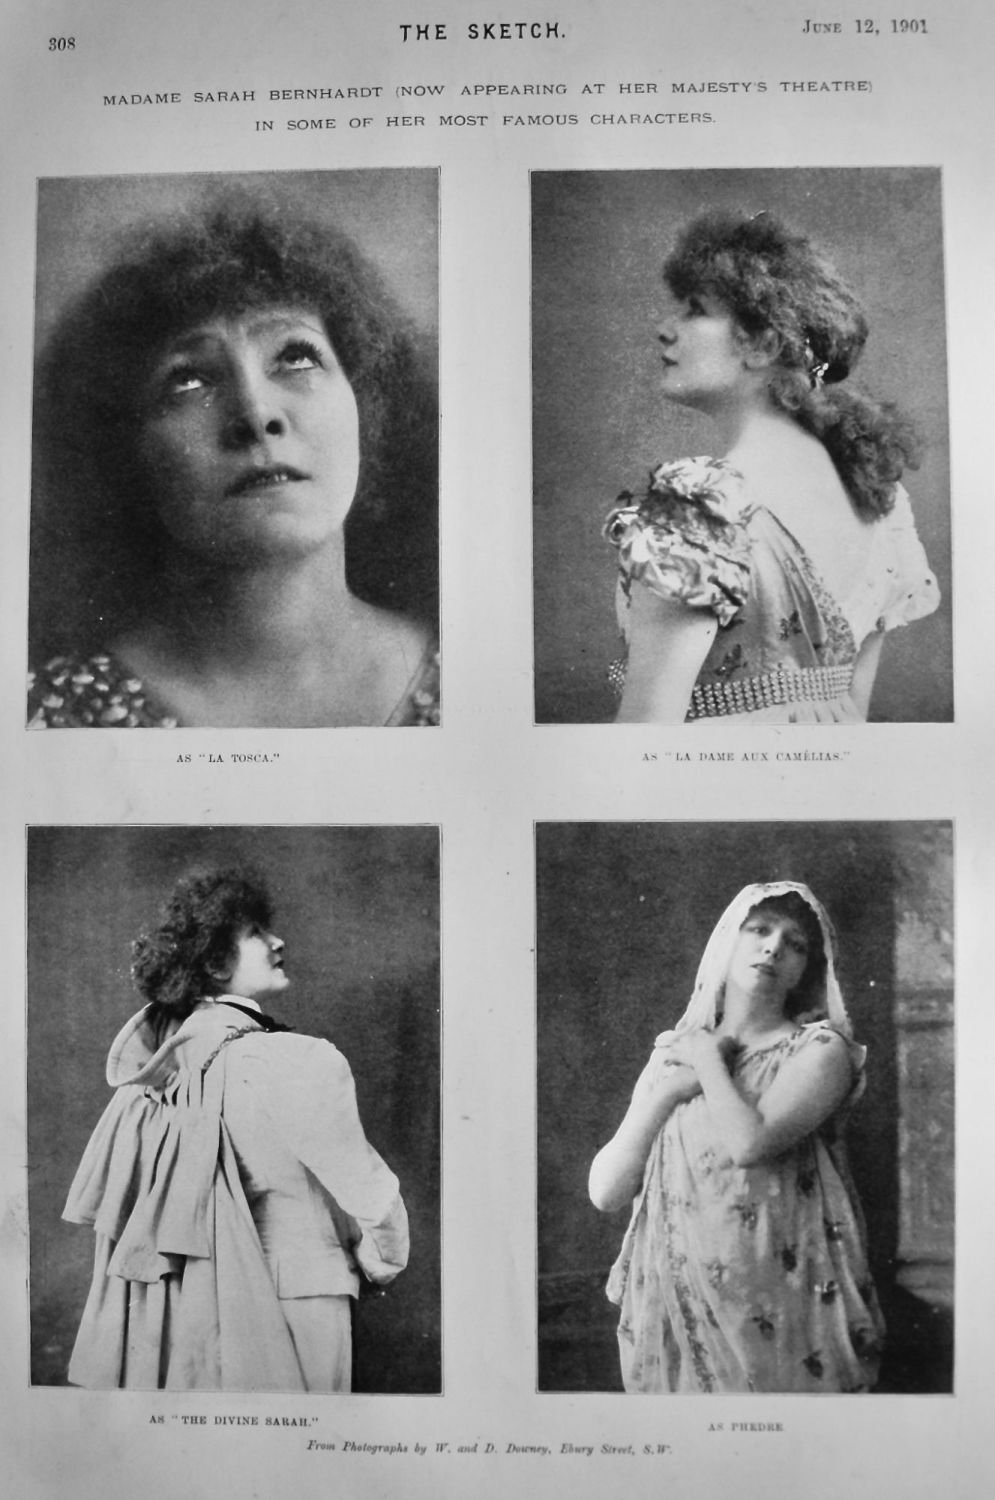 Madame Sarah Bernhardt (Now appearing at Her Majesty's Theatre) in some of 